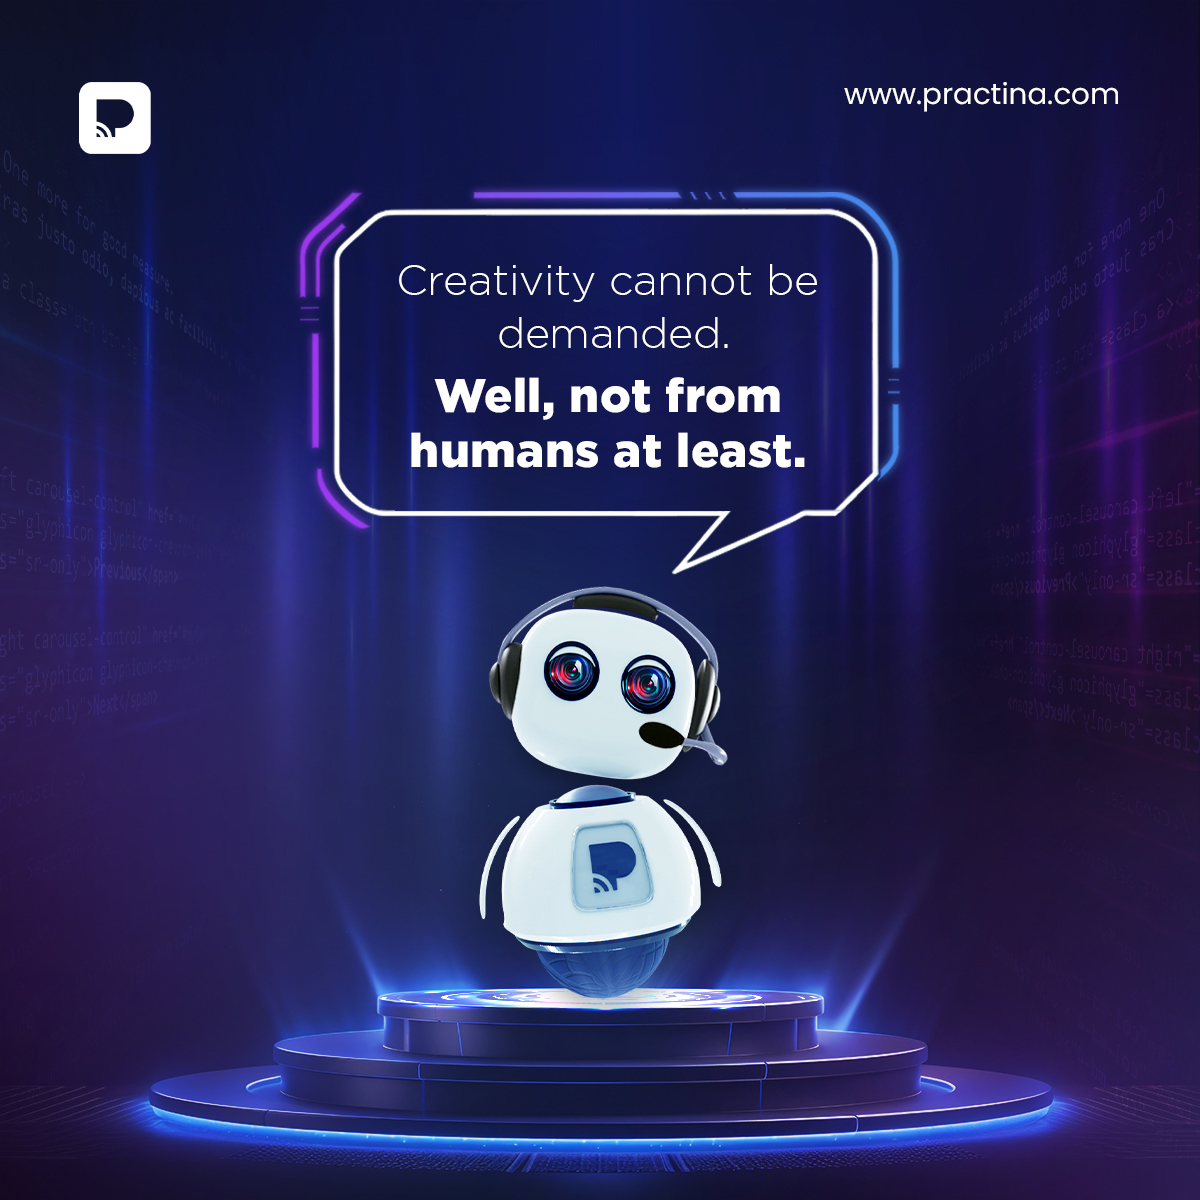 But it can be demanded from Practina - regardless of the day and time. Yes, Practina doesn't have creative blocks or a snooze button. Creativity on demand, whenever you need it. Get a FREE Trial today!